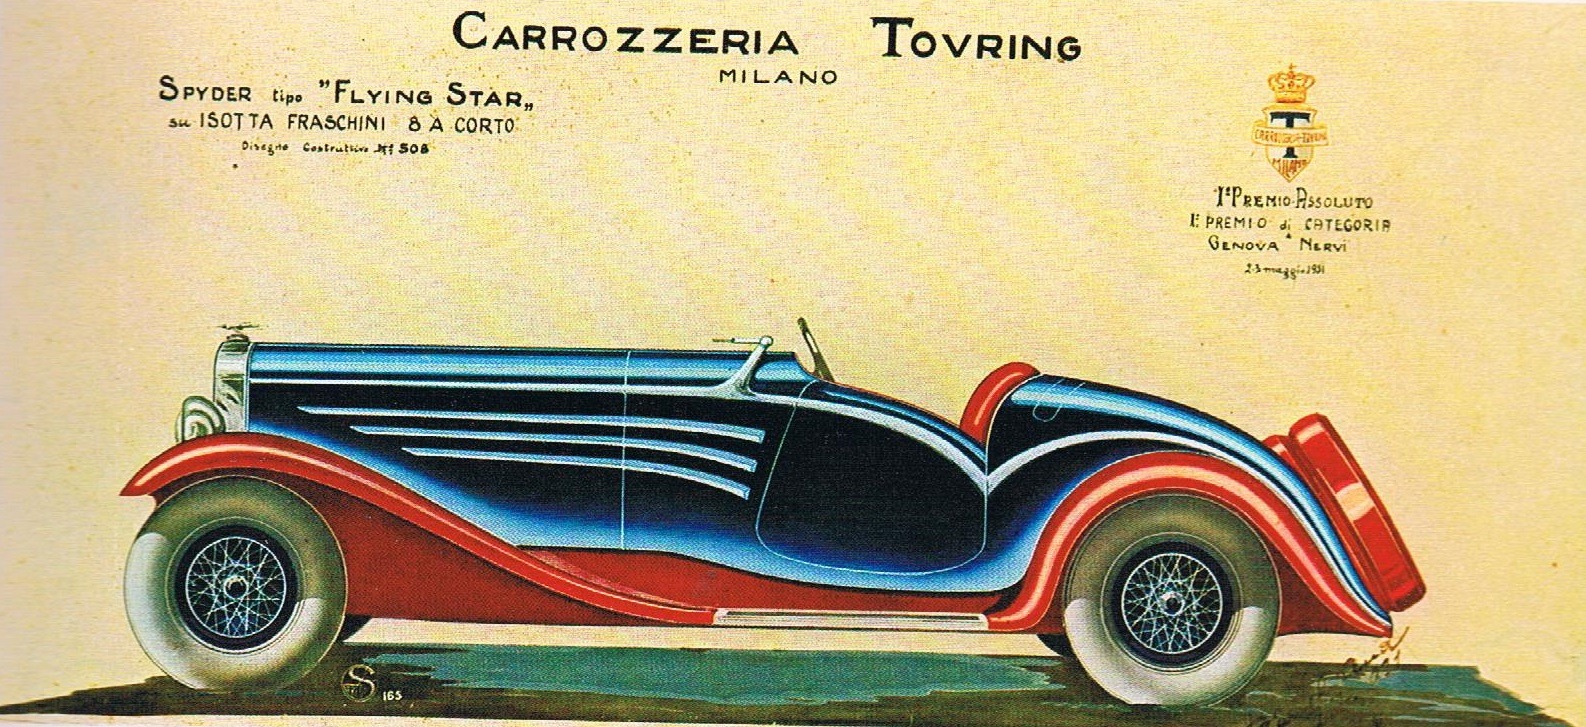 Isotta-Fraschini-8A-Corto-Spyder-Flying-Star-by-Carrozzeria-Touring-1931